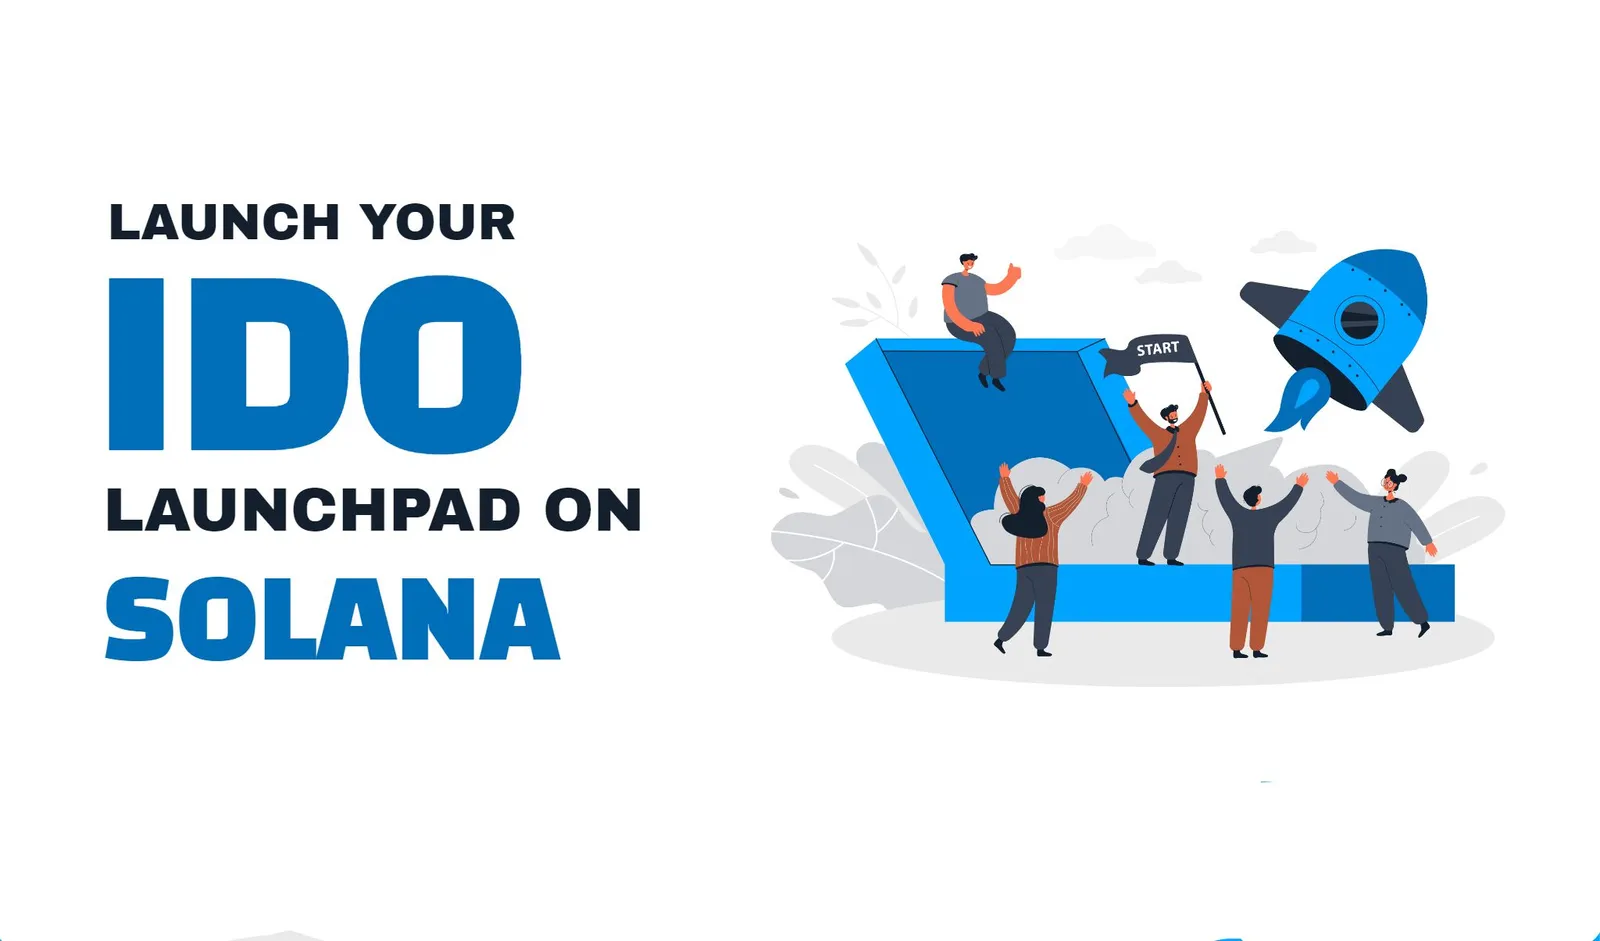 Launch your IDO Launchpad on Solana